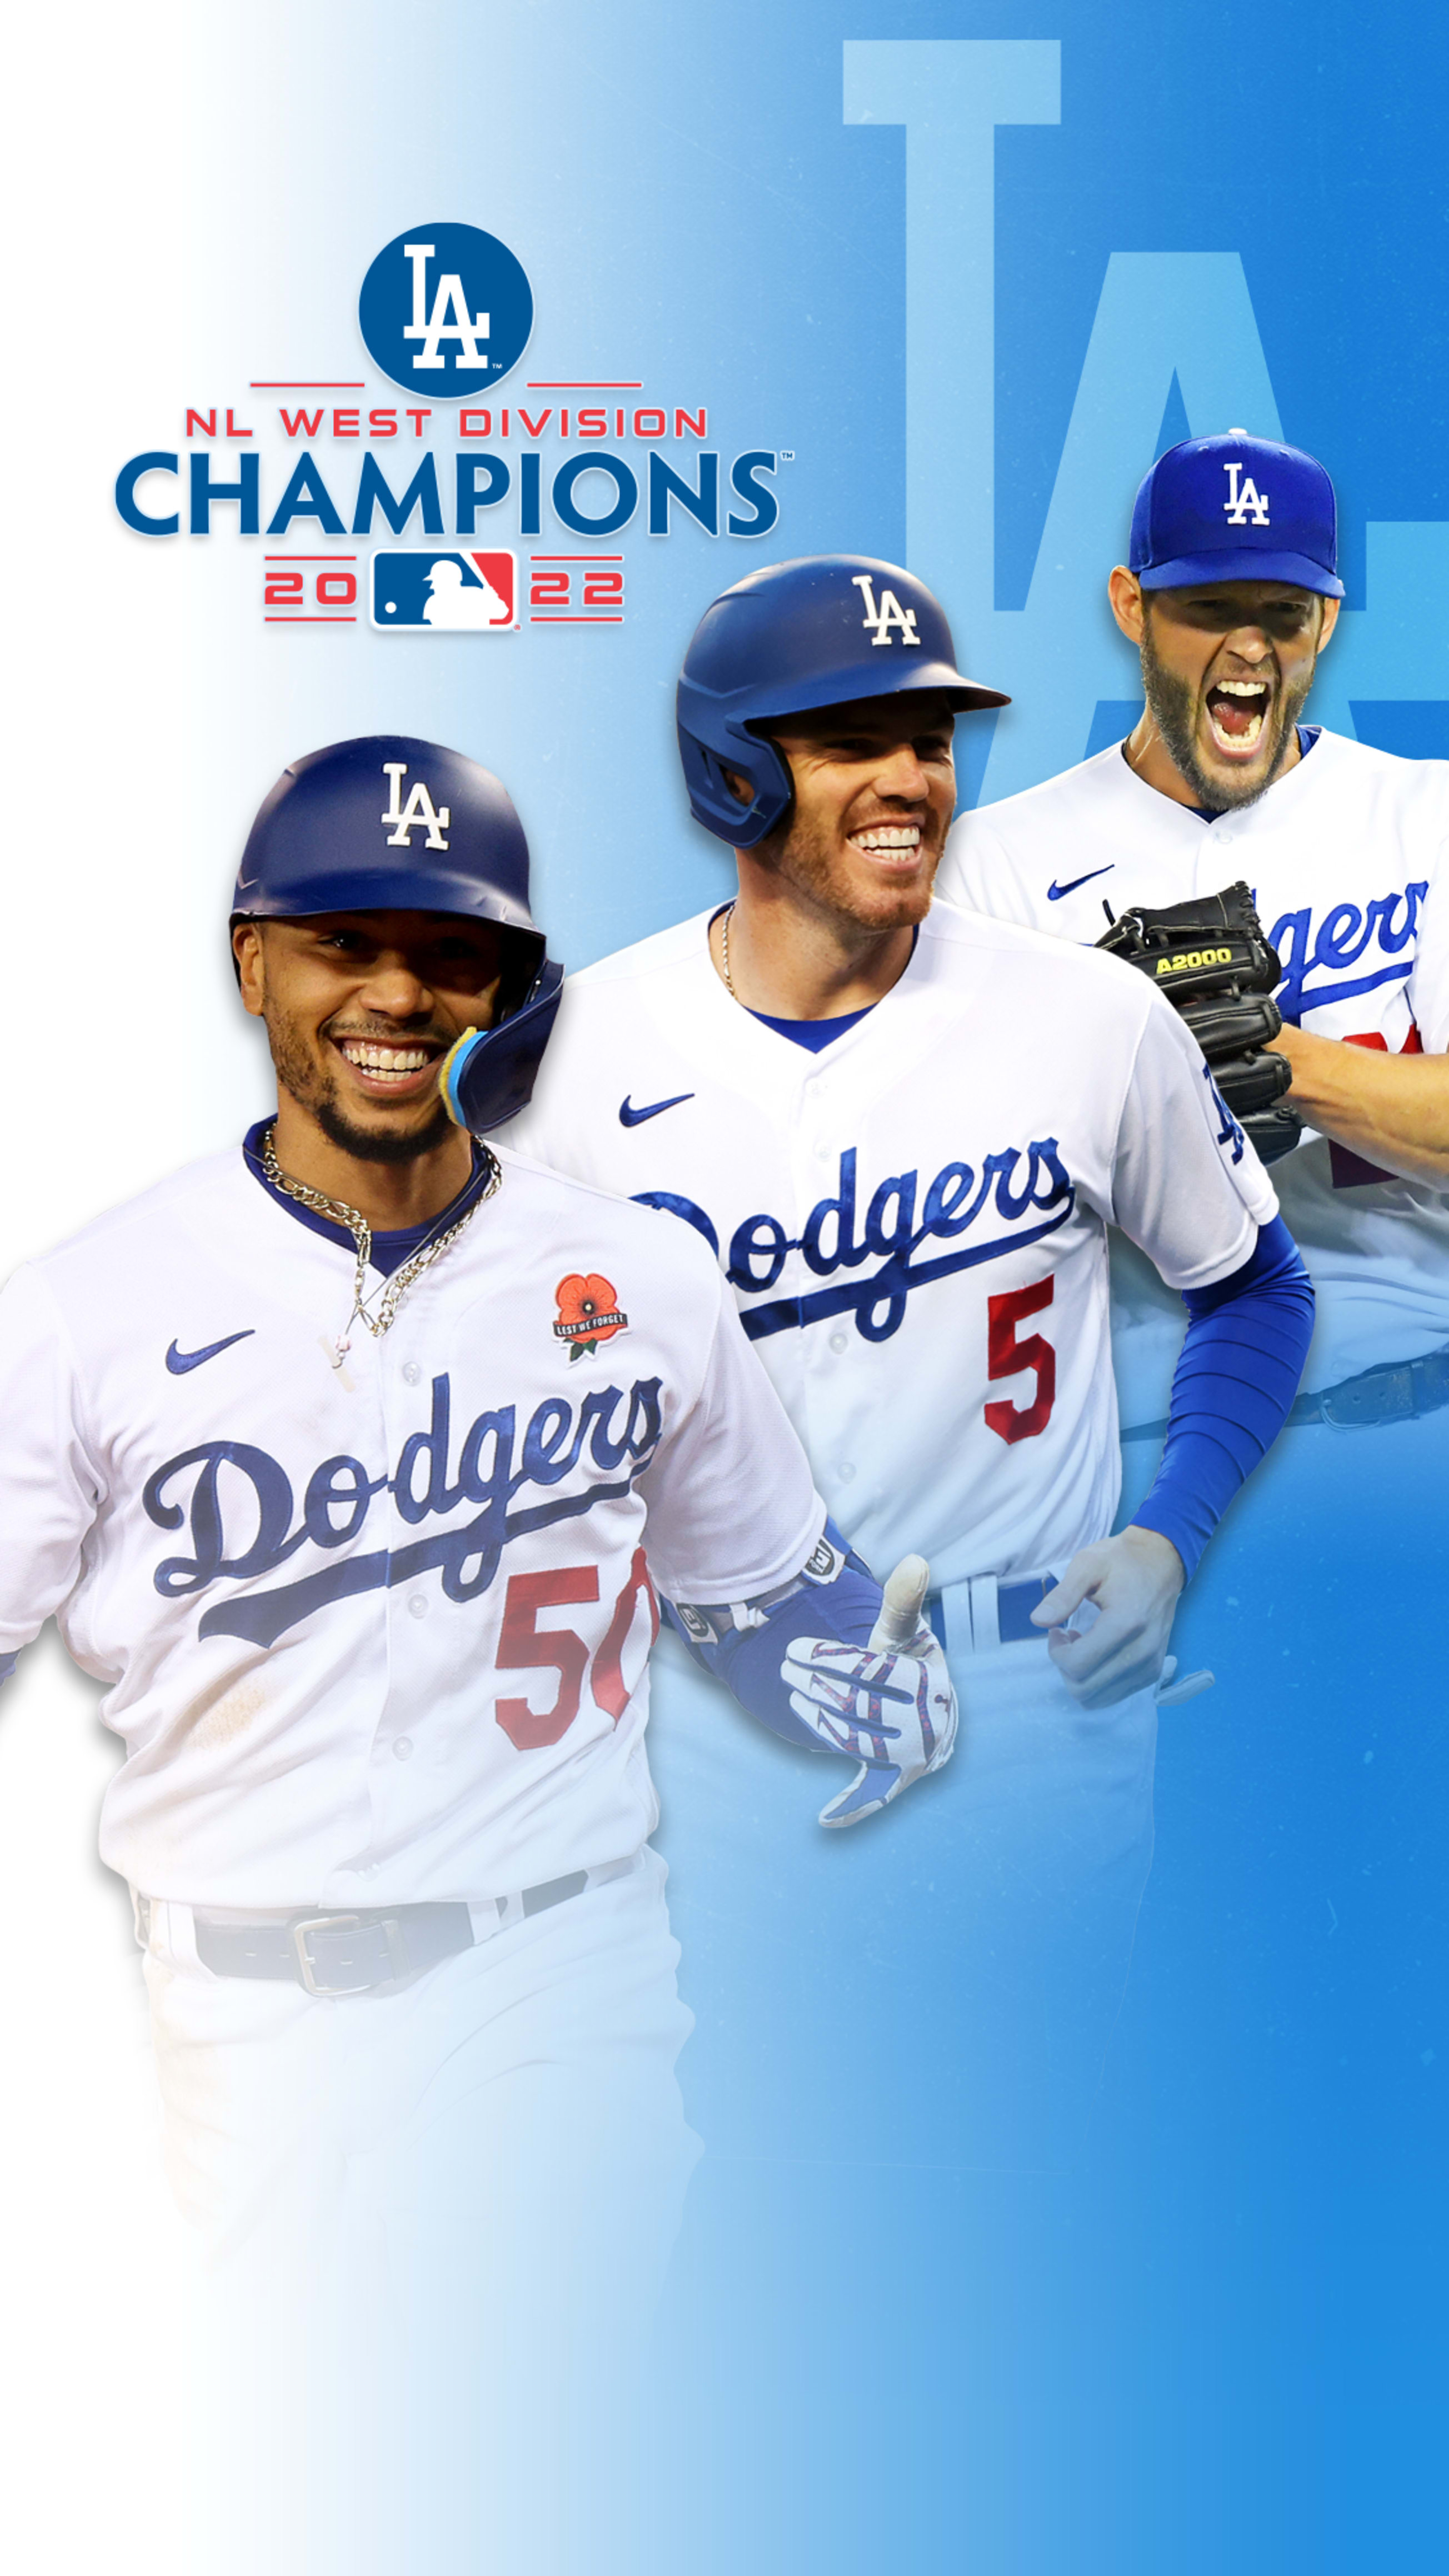 MLB Stories - How They Got There: 2022 Dodgers season